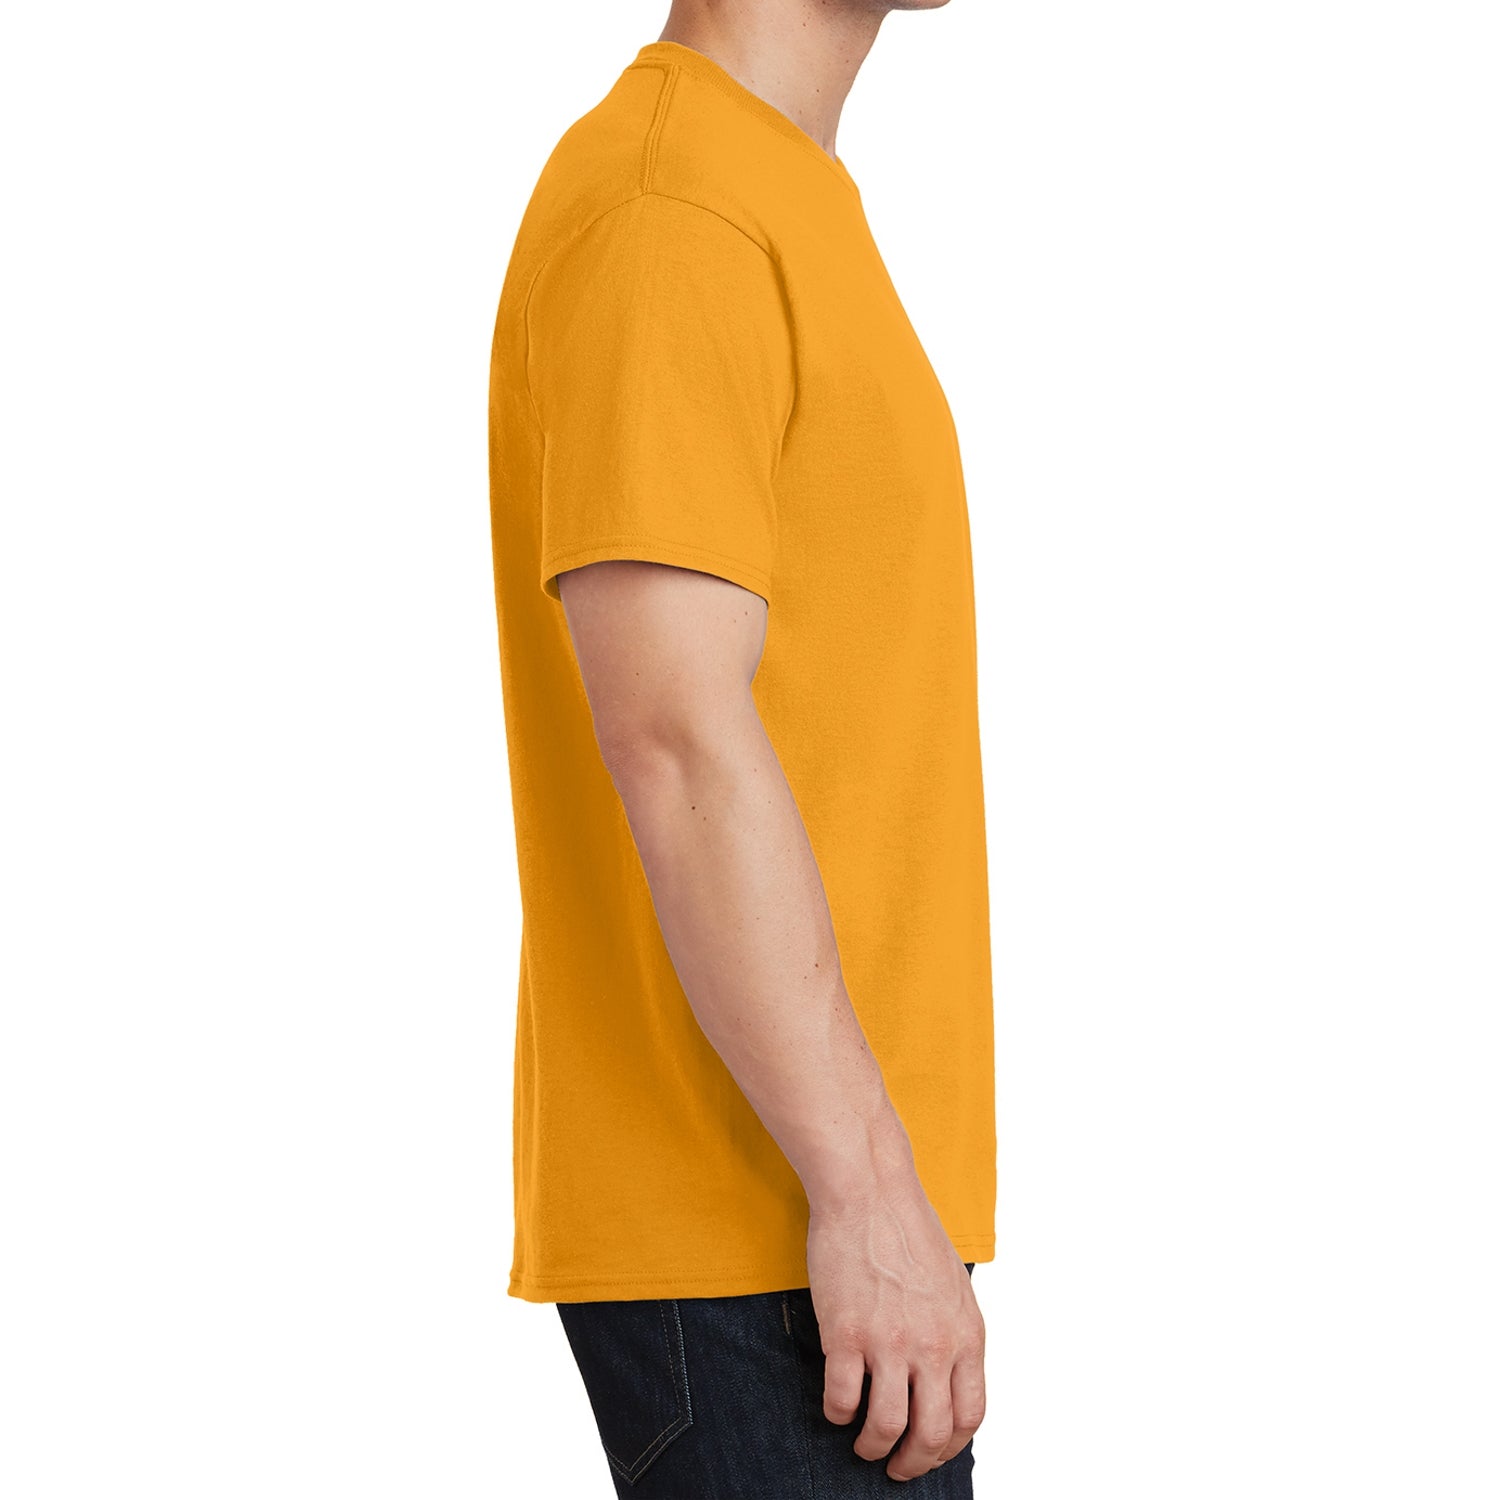 Core Cotton Tee - Gold